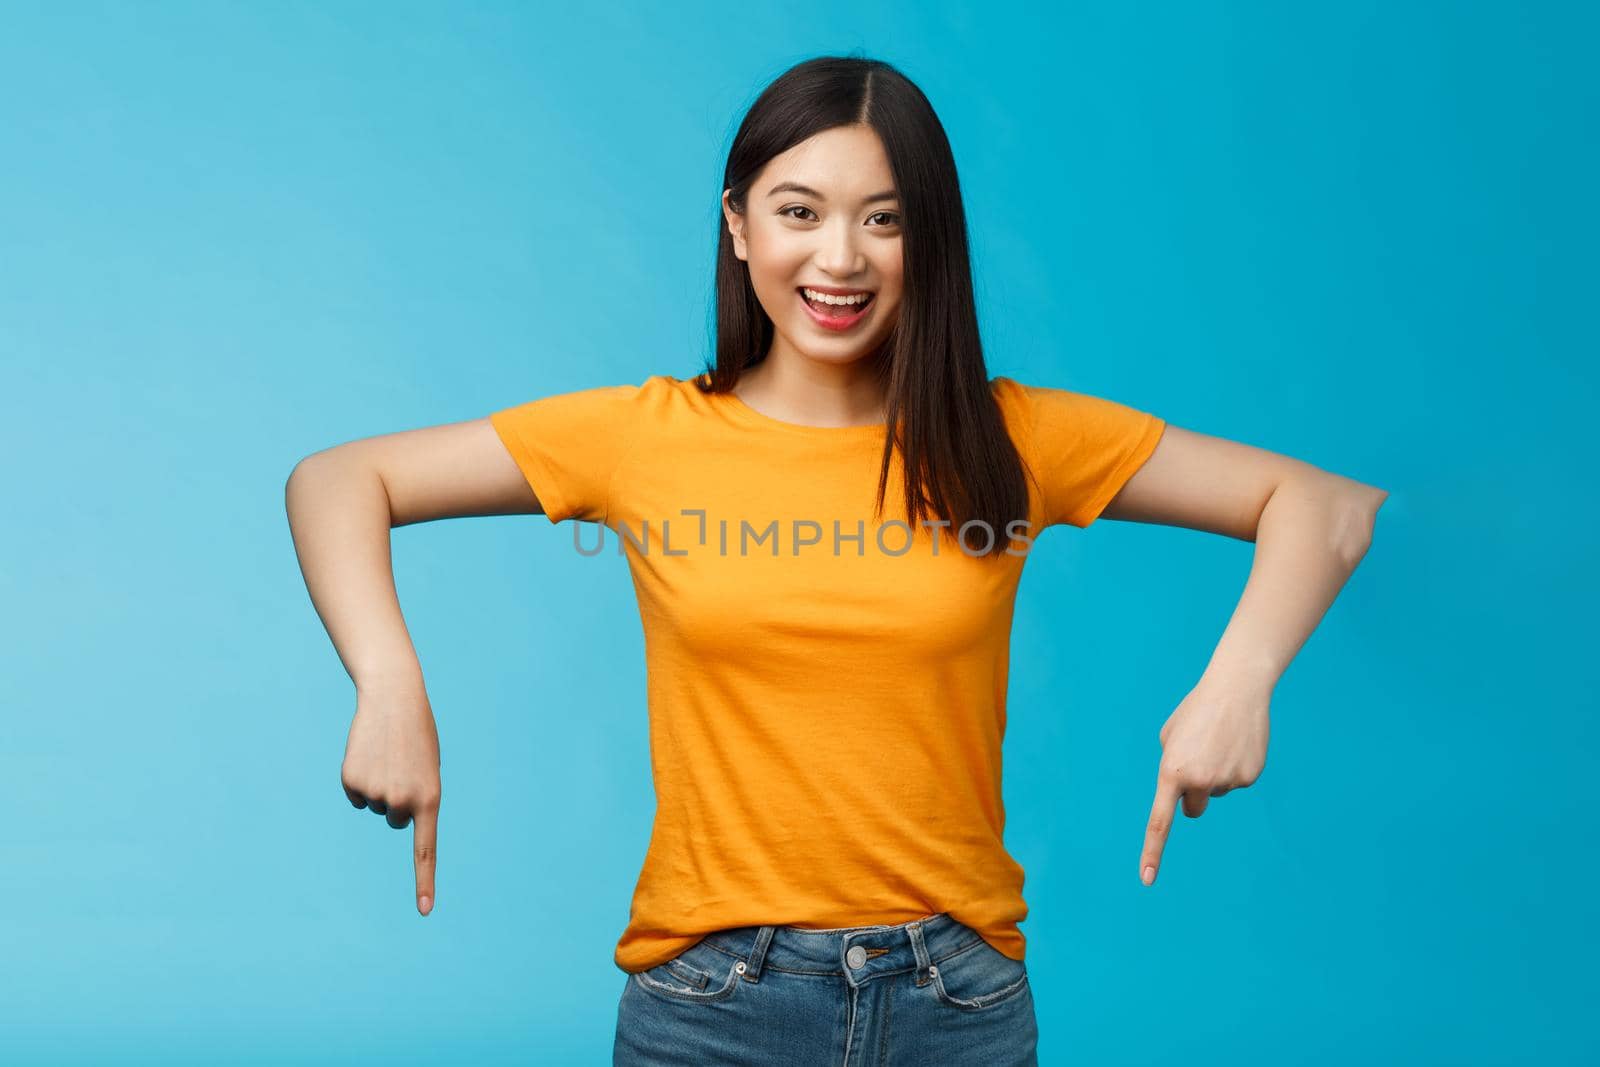 Enthusiastic pleasant asian blong modern female student inviting you visit awesome event pointing down indicating bottom advertisement, stand blue background smiling broadly look happily camera.